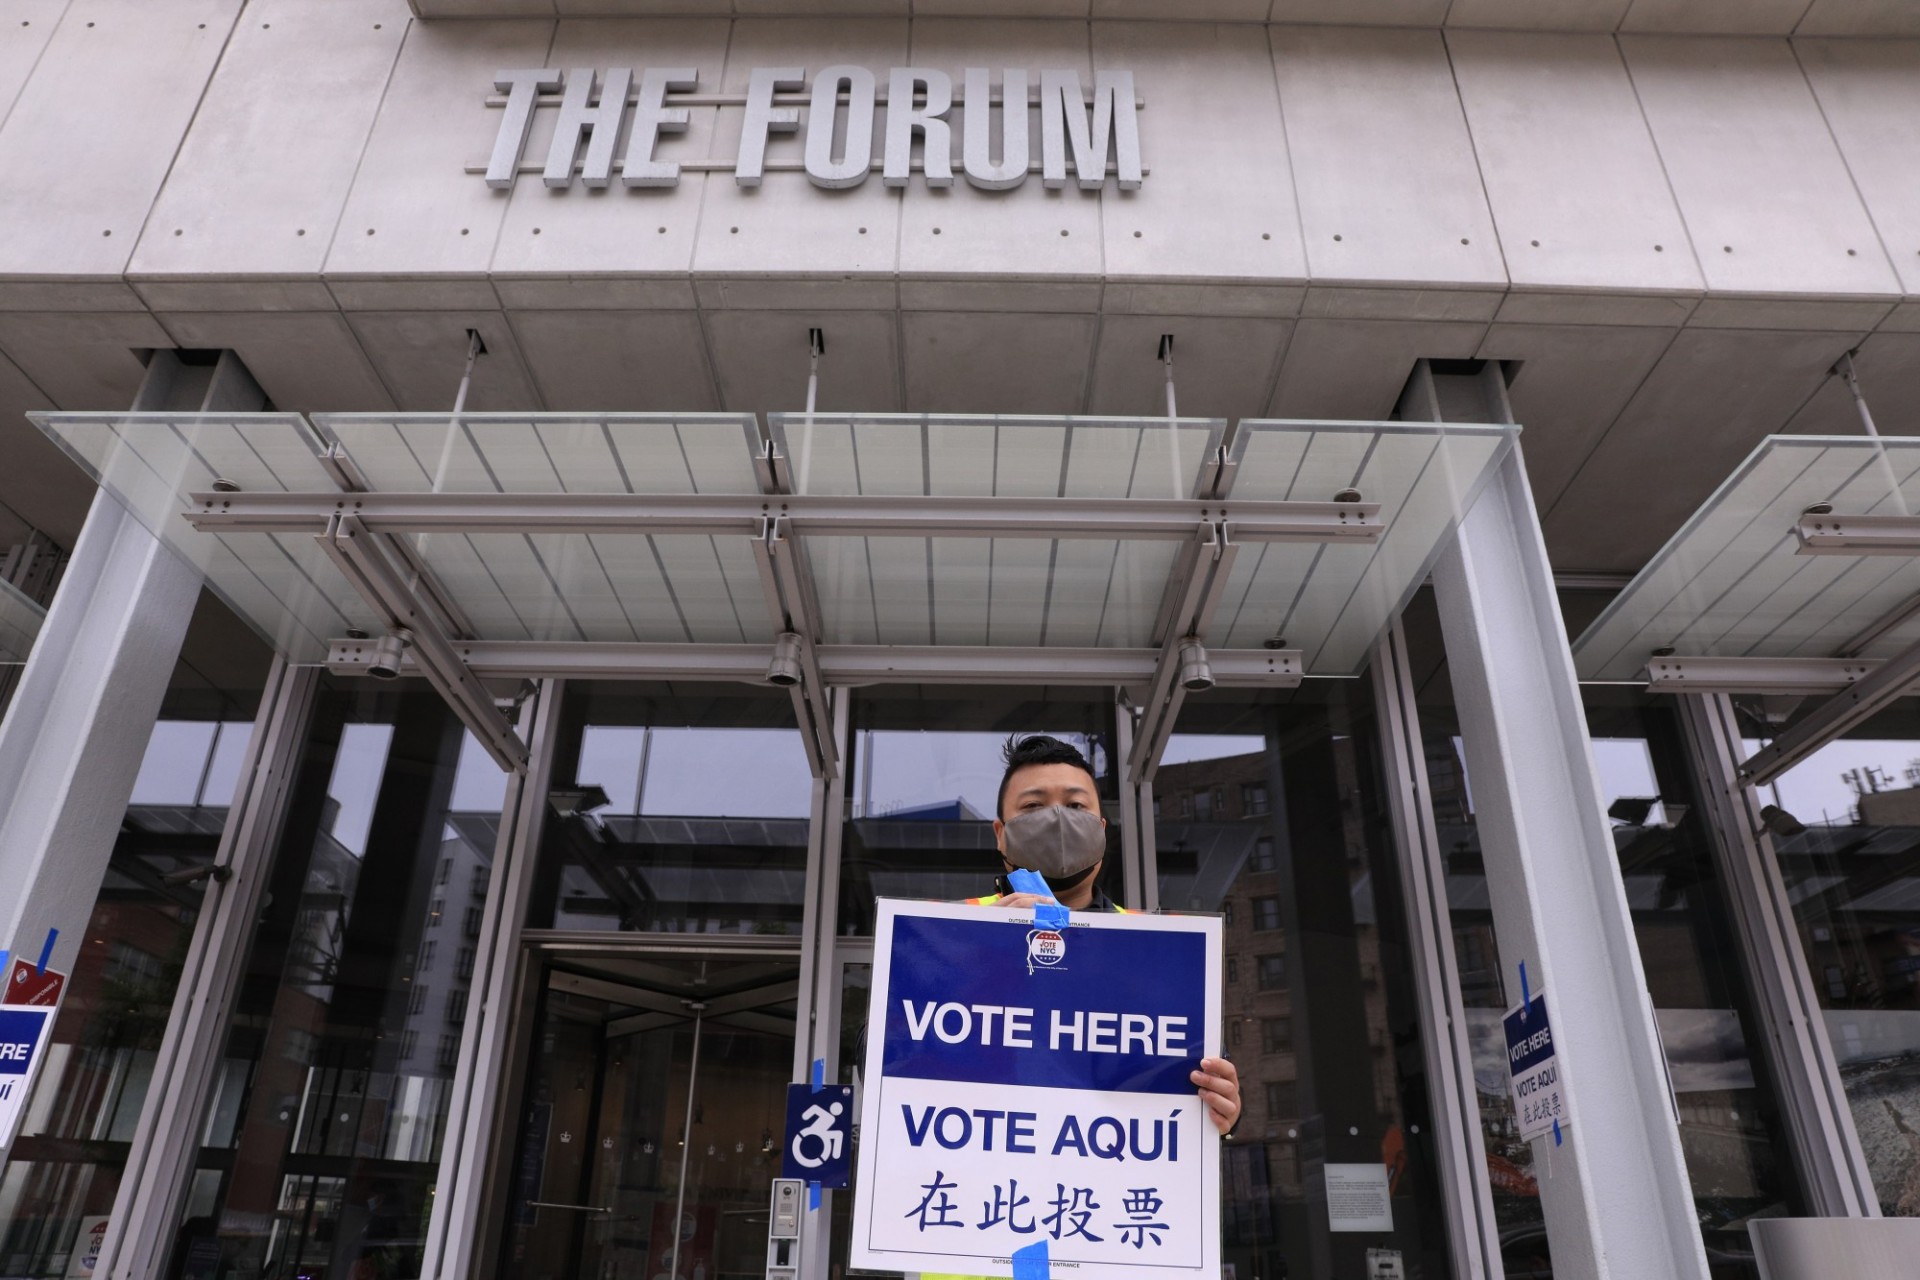 A man wearing a face mask stands in front of The Forum building holding a blue and white sign that says "Vote Here, Vote Aqui"